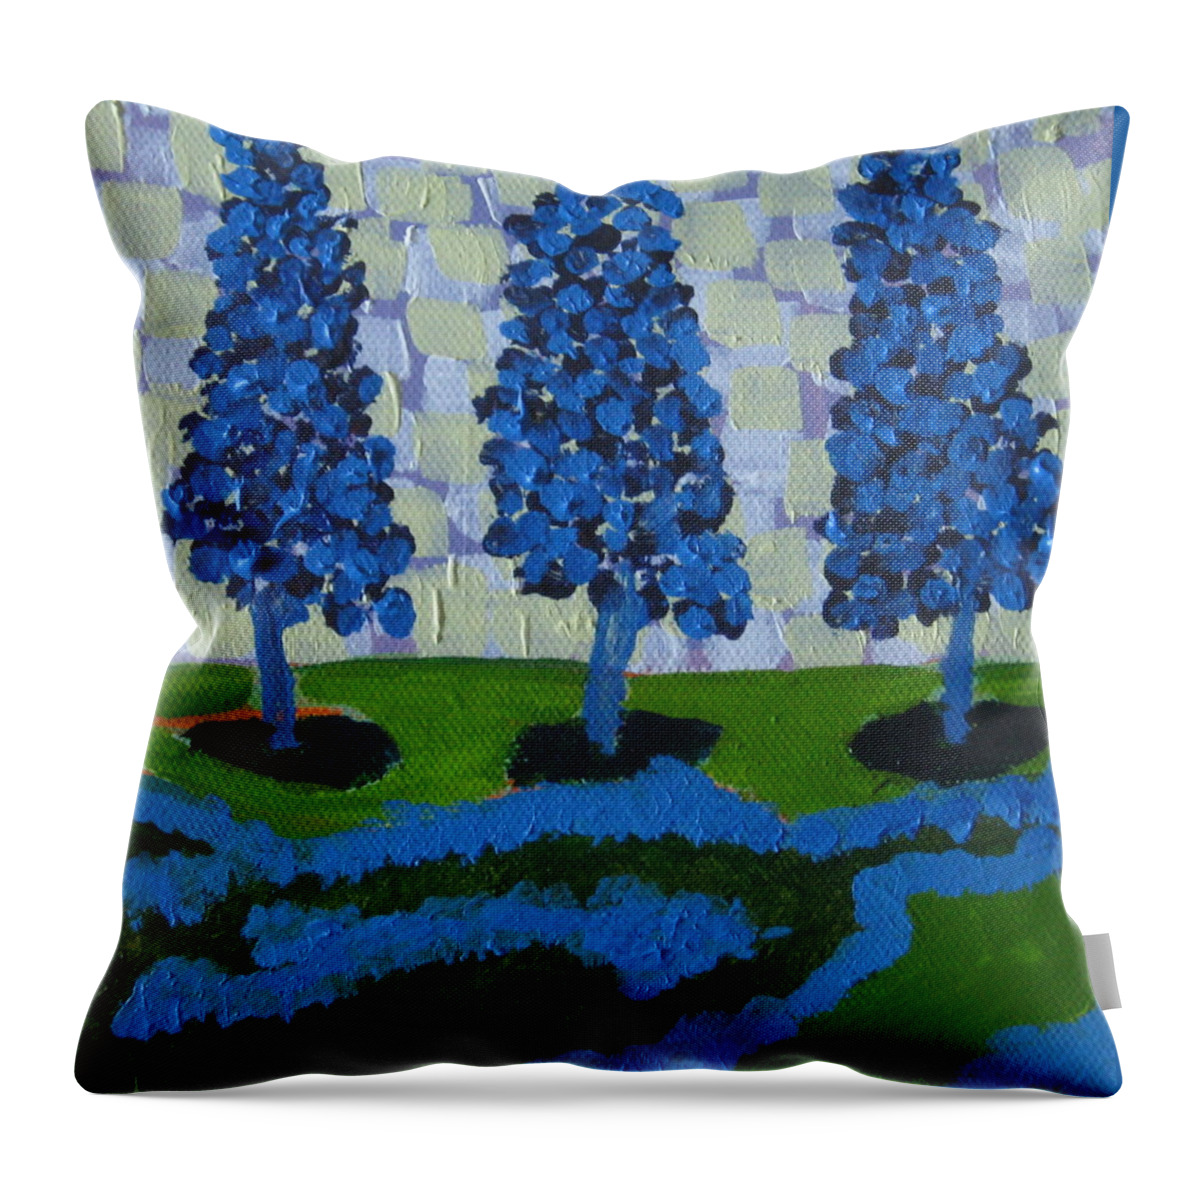 Magical Throw Pillow featuring the painting Those Trees I Always See 11 by Edy Ottesen